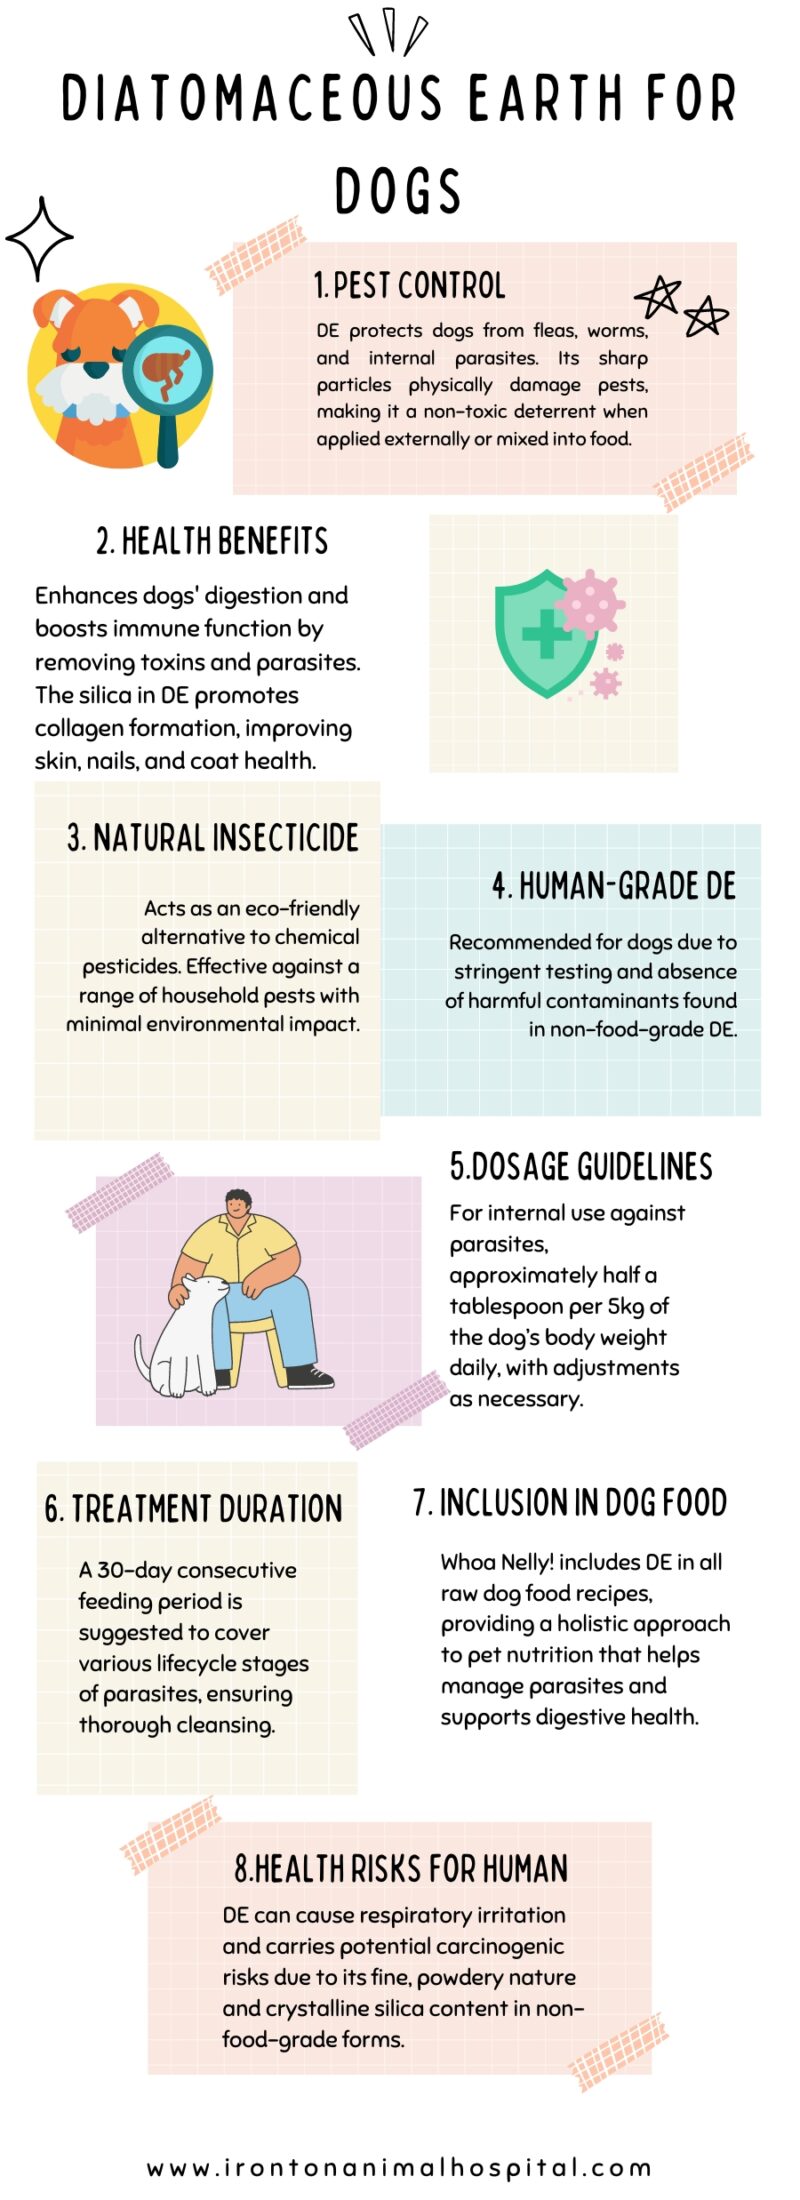 Diatomaceous Earth for Dogs infographic